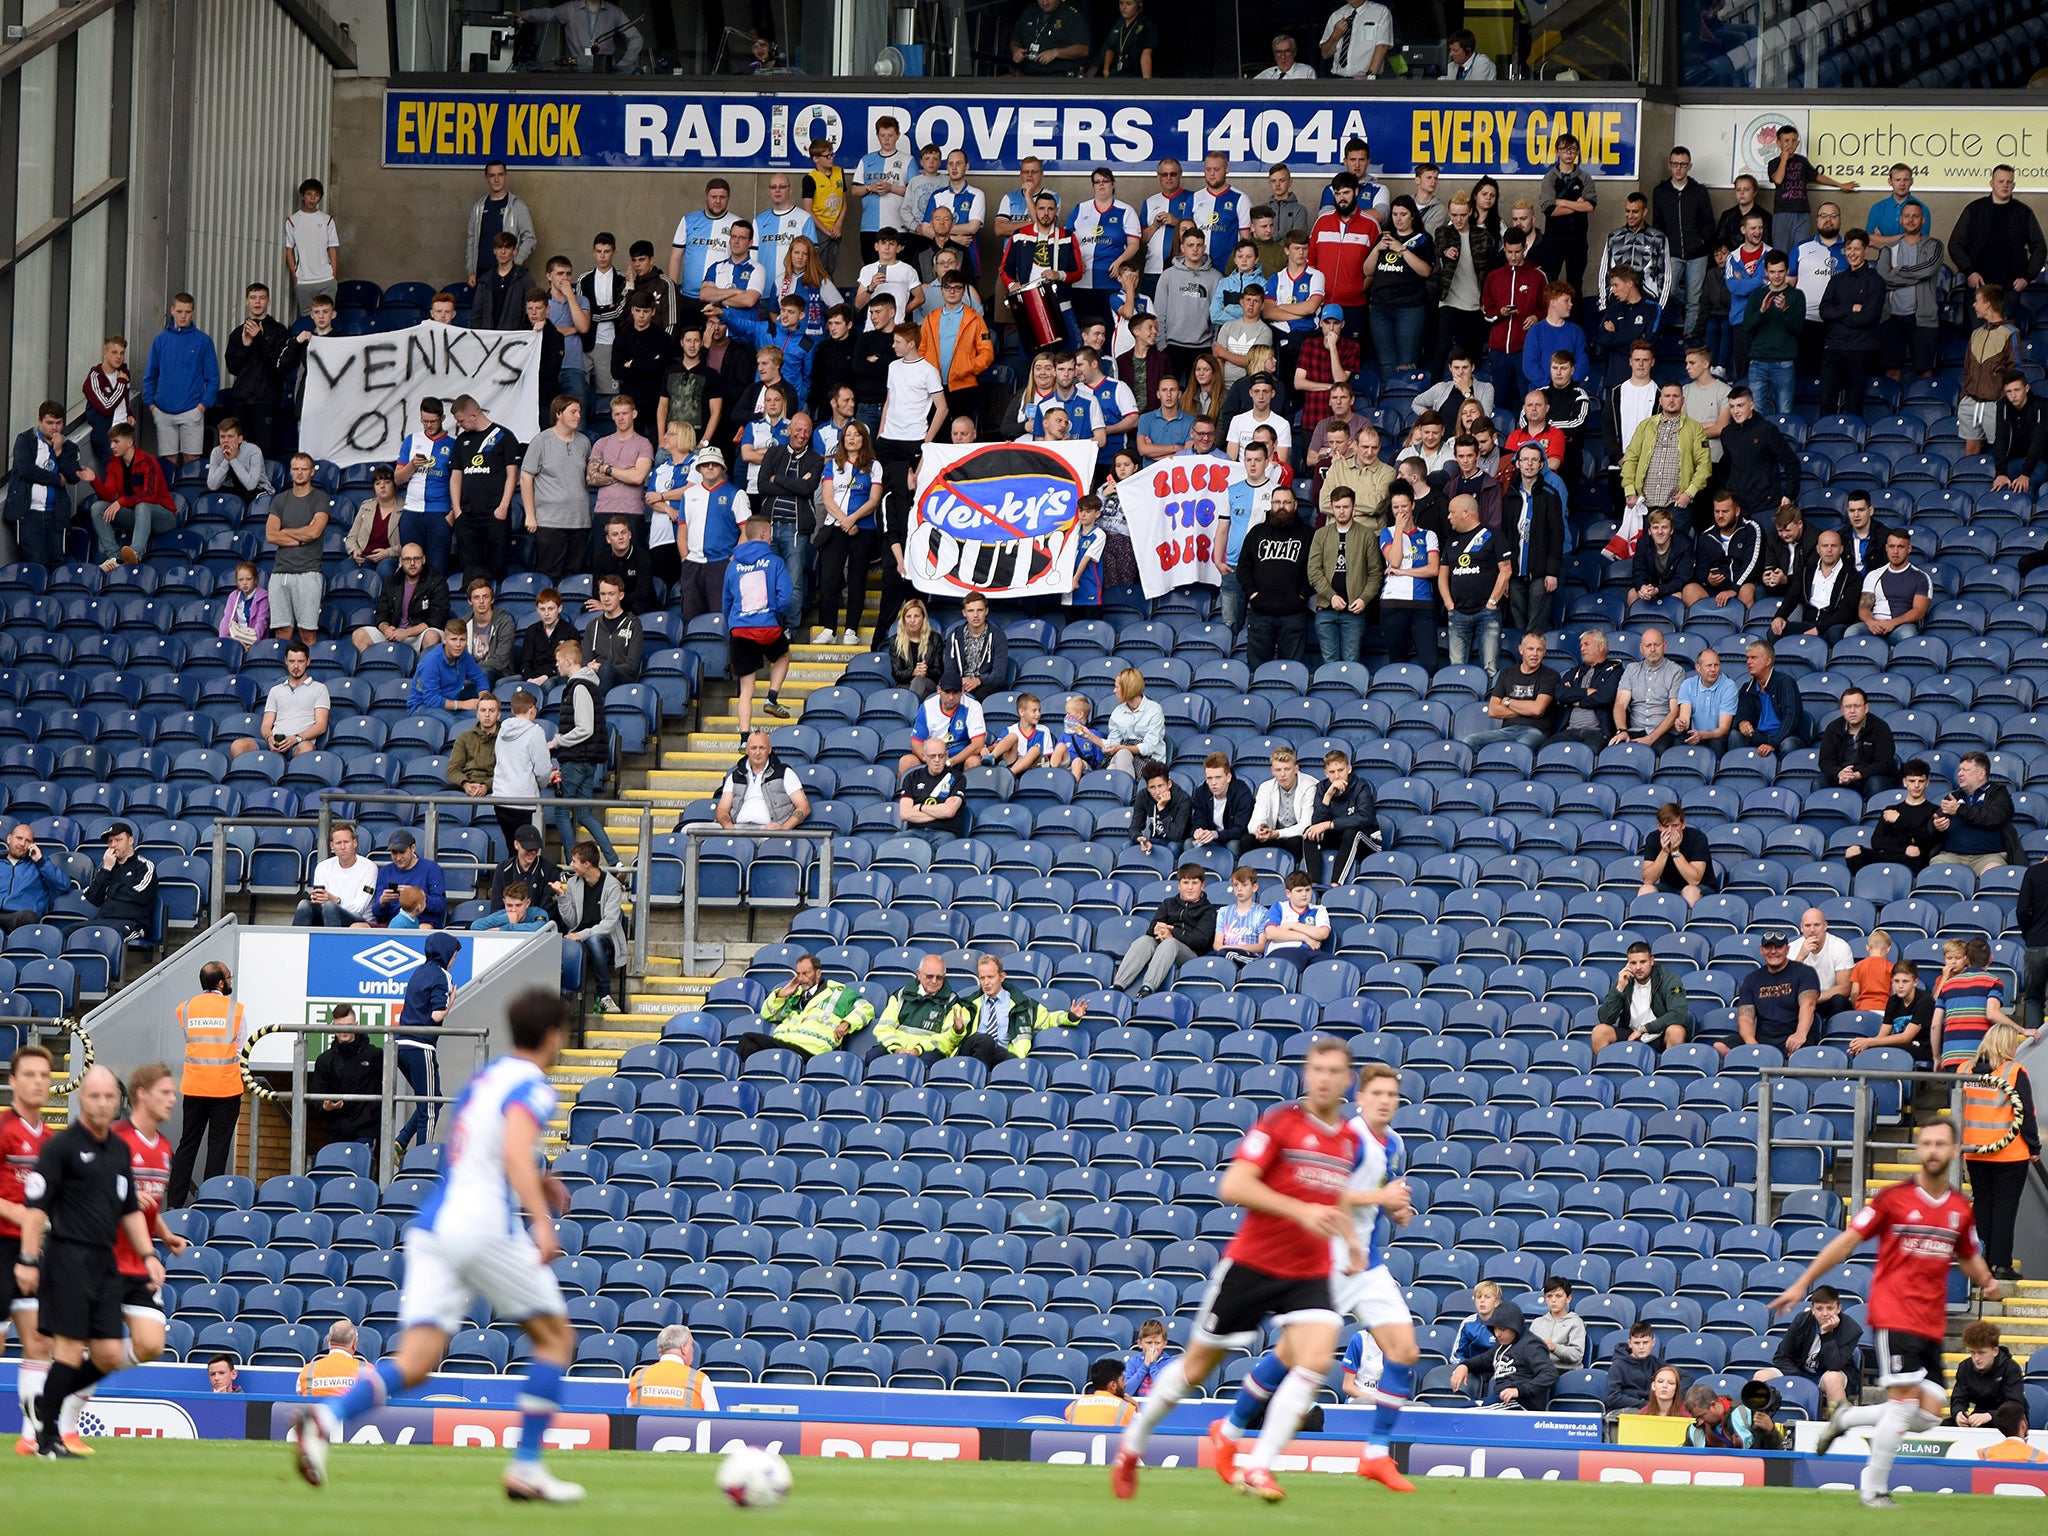 Ewood Park will be sparsely populated for this weekend's fourth round tie, with fans of both clubs staging a joint boycott